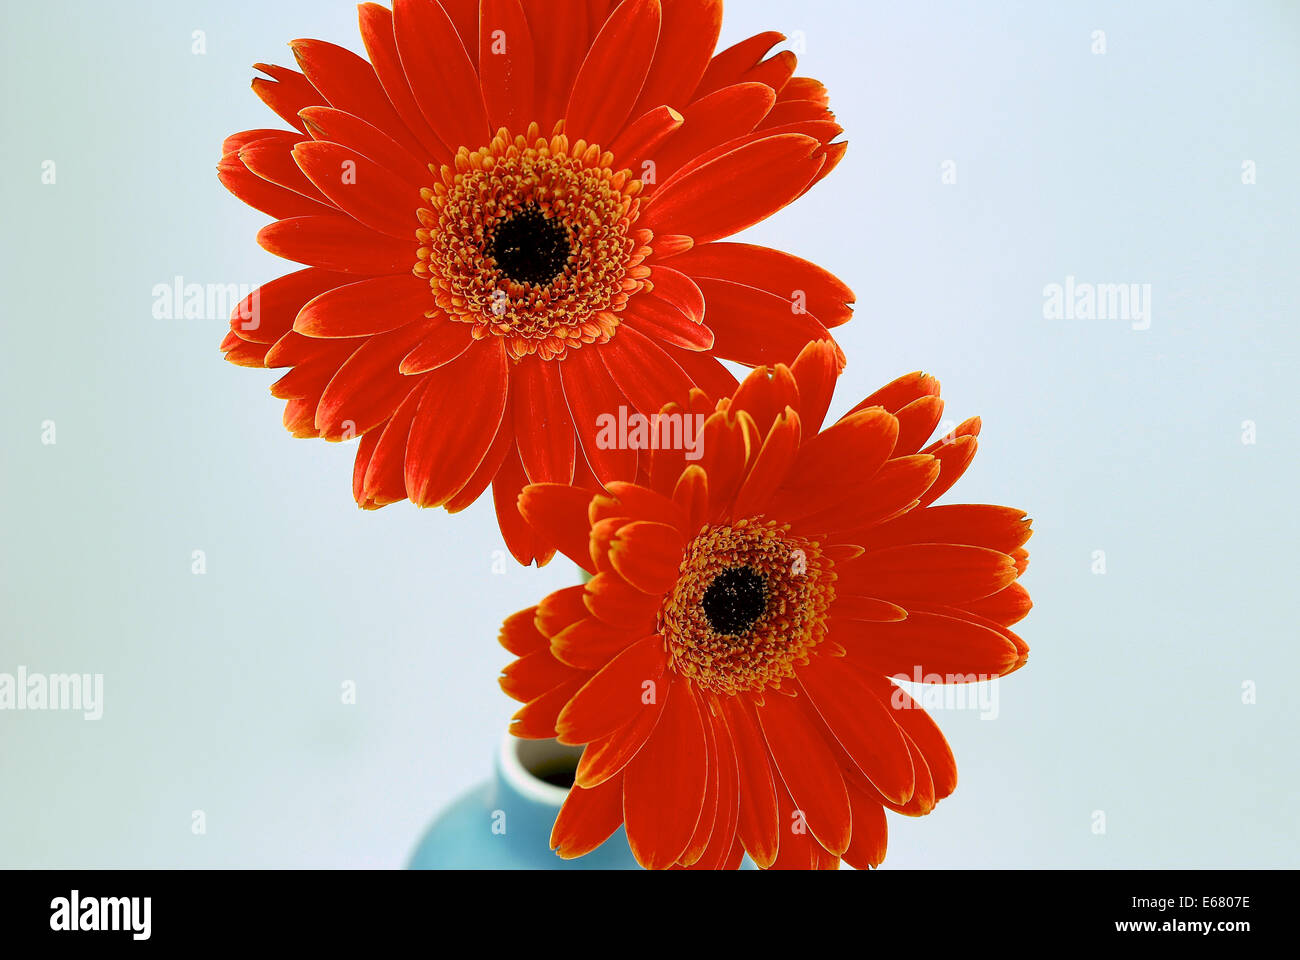 Bouquet of Red, orange Gerbera Daisies in a turquoise vase Stock Photo